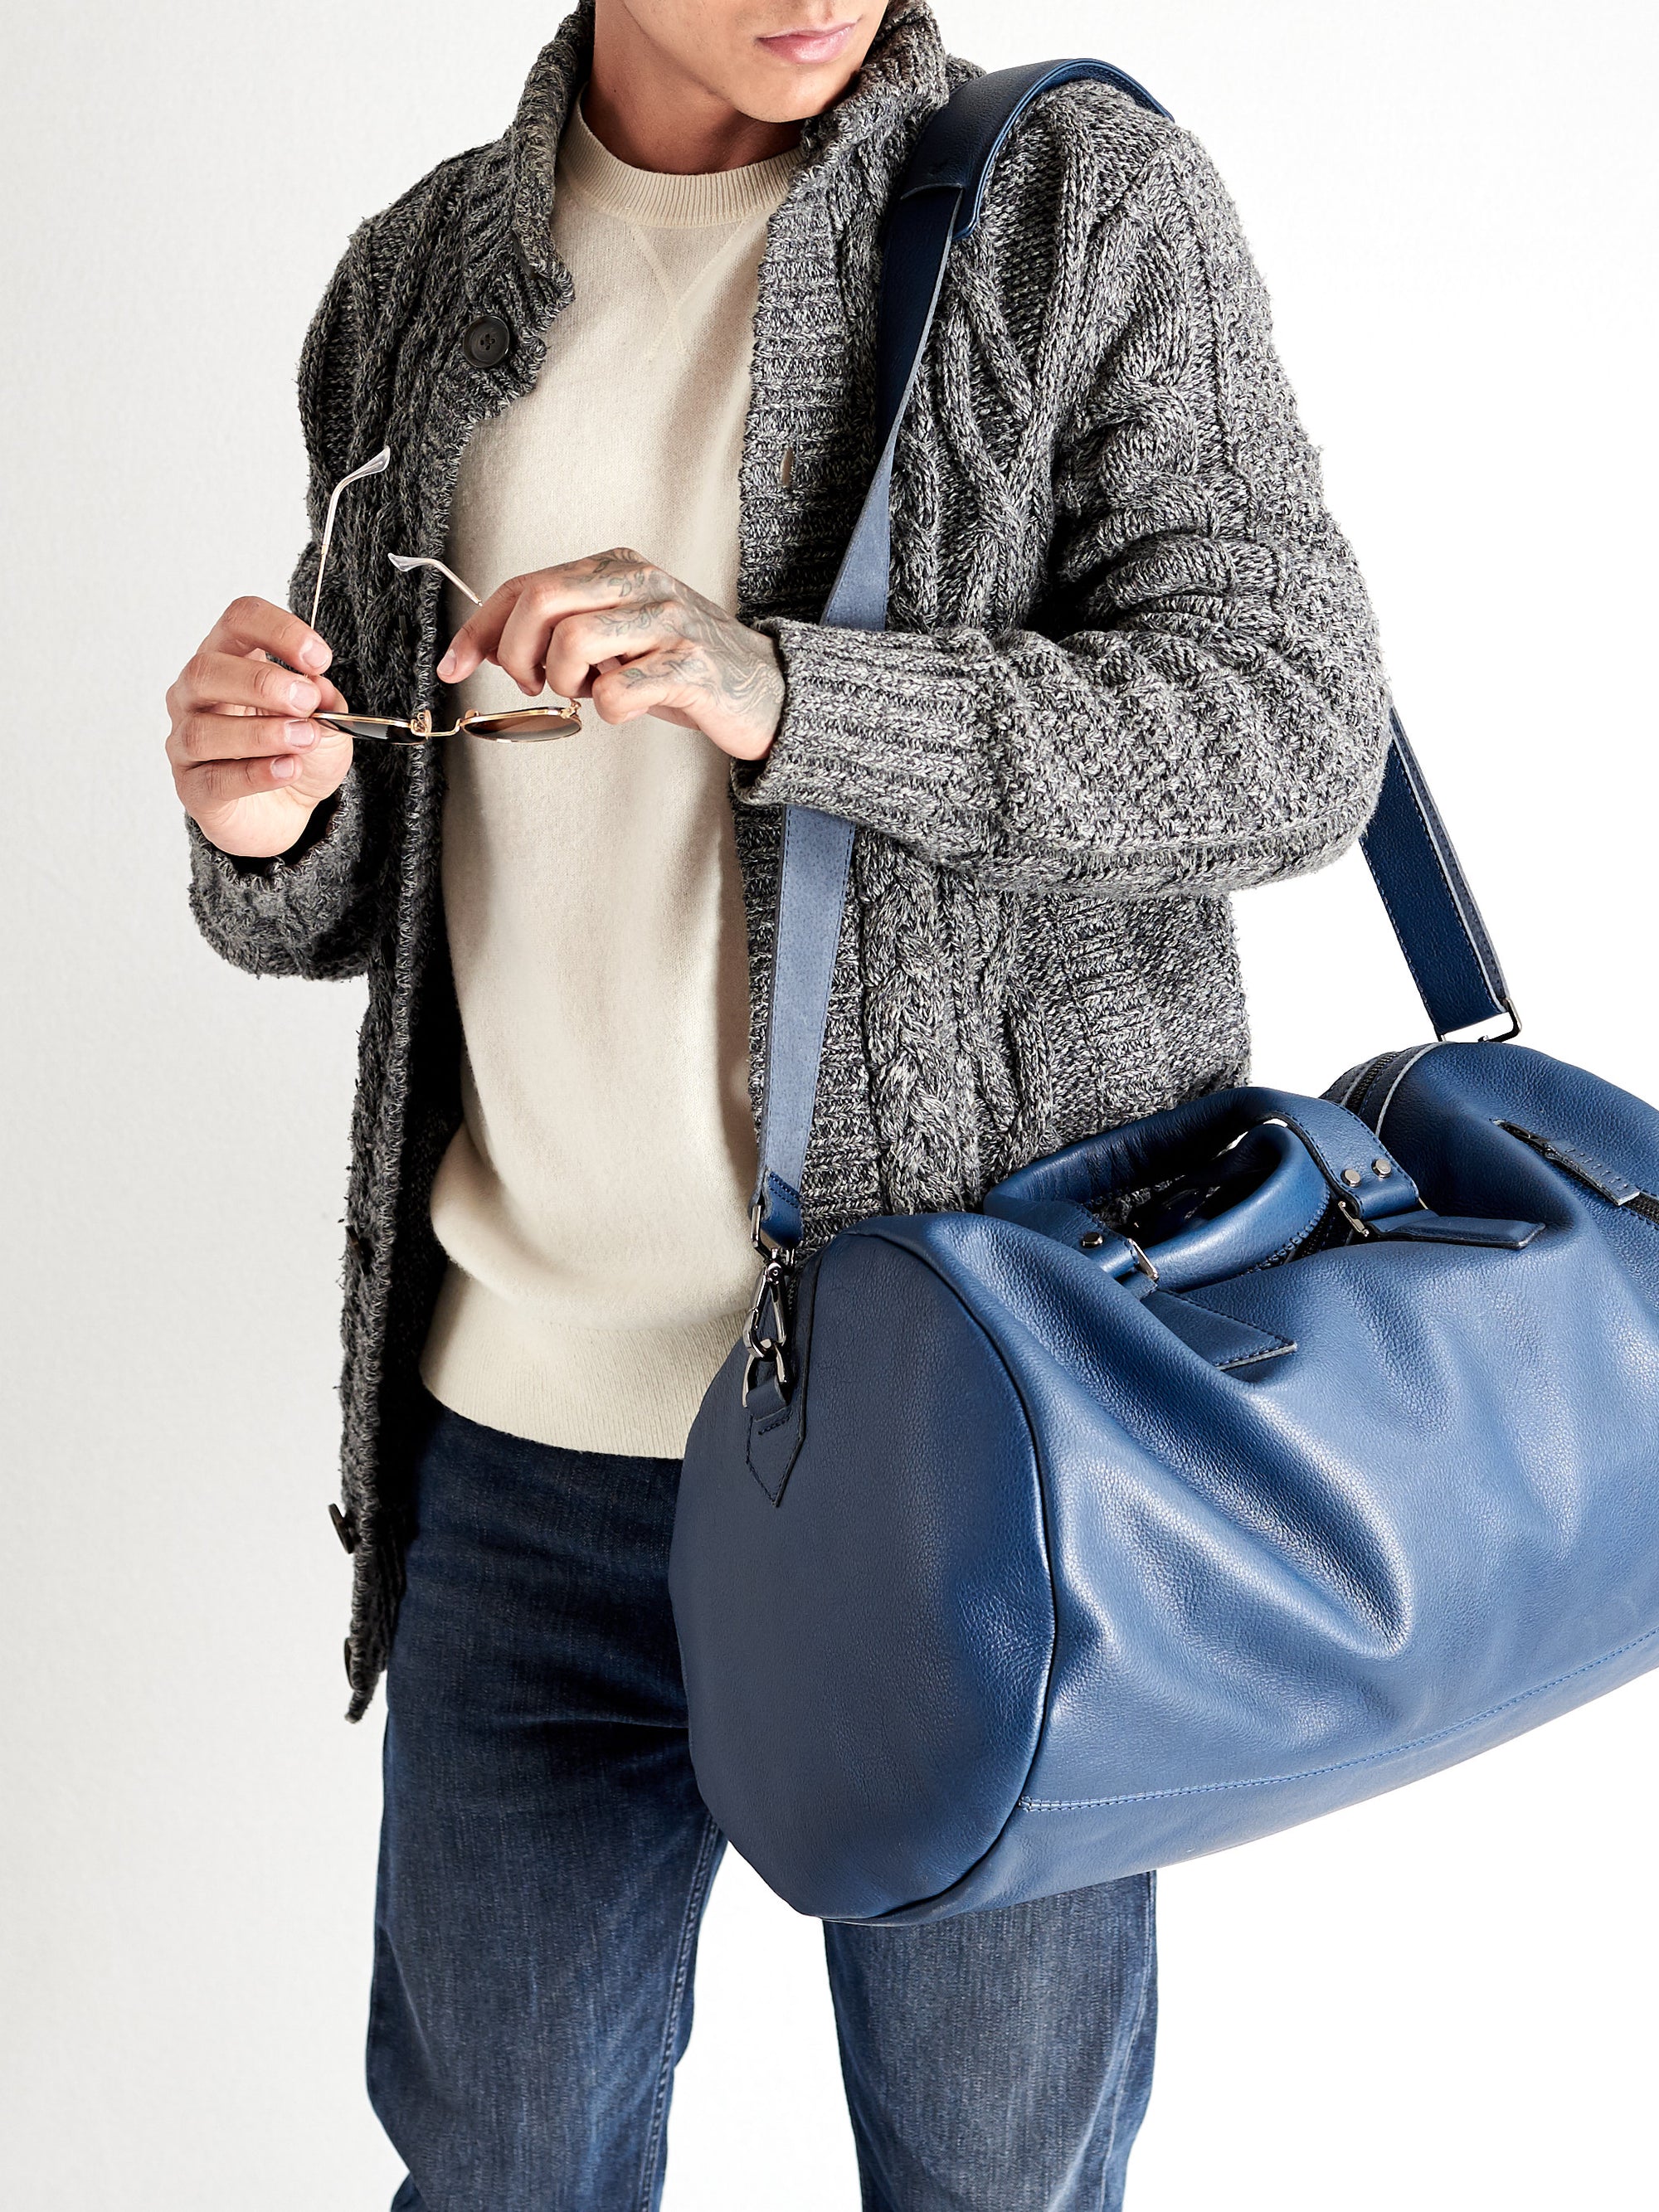 Modern style. Substantial Duffle Bag Navy by Capra Leather